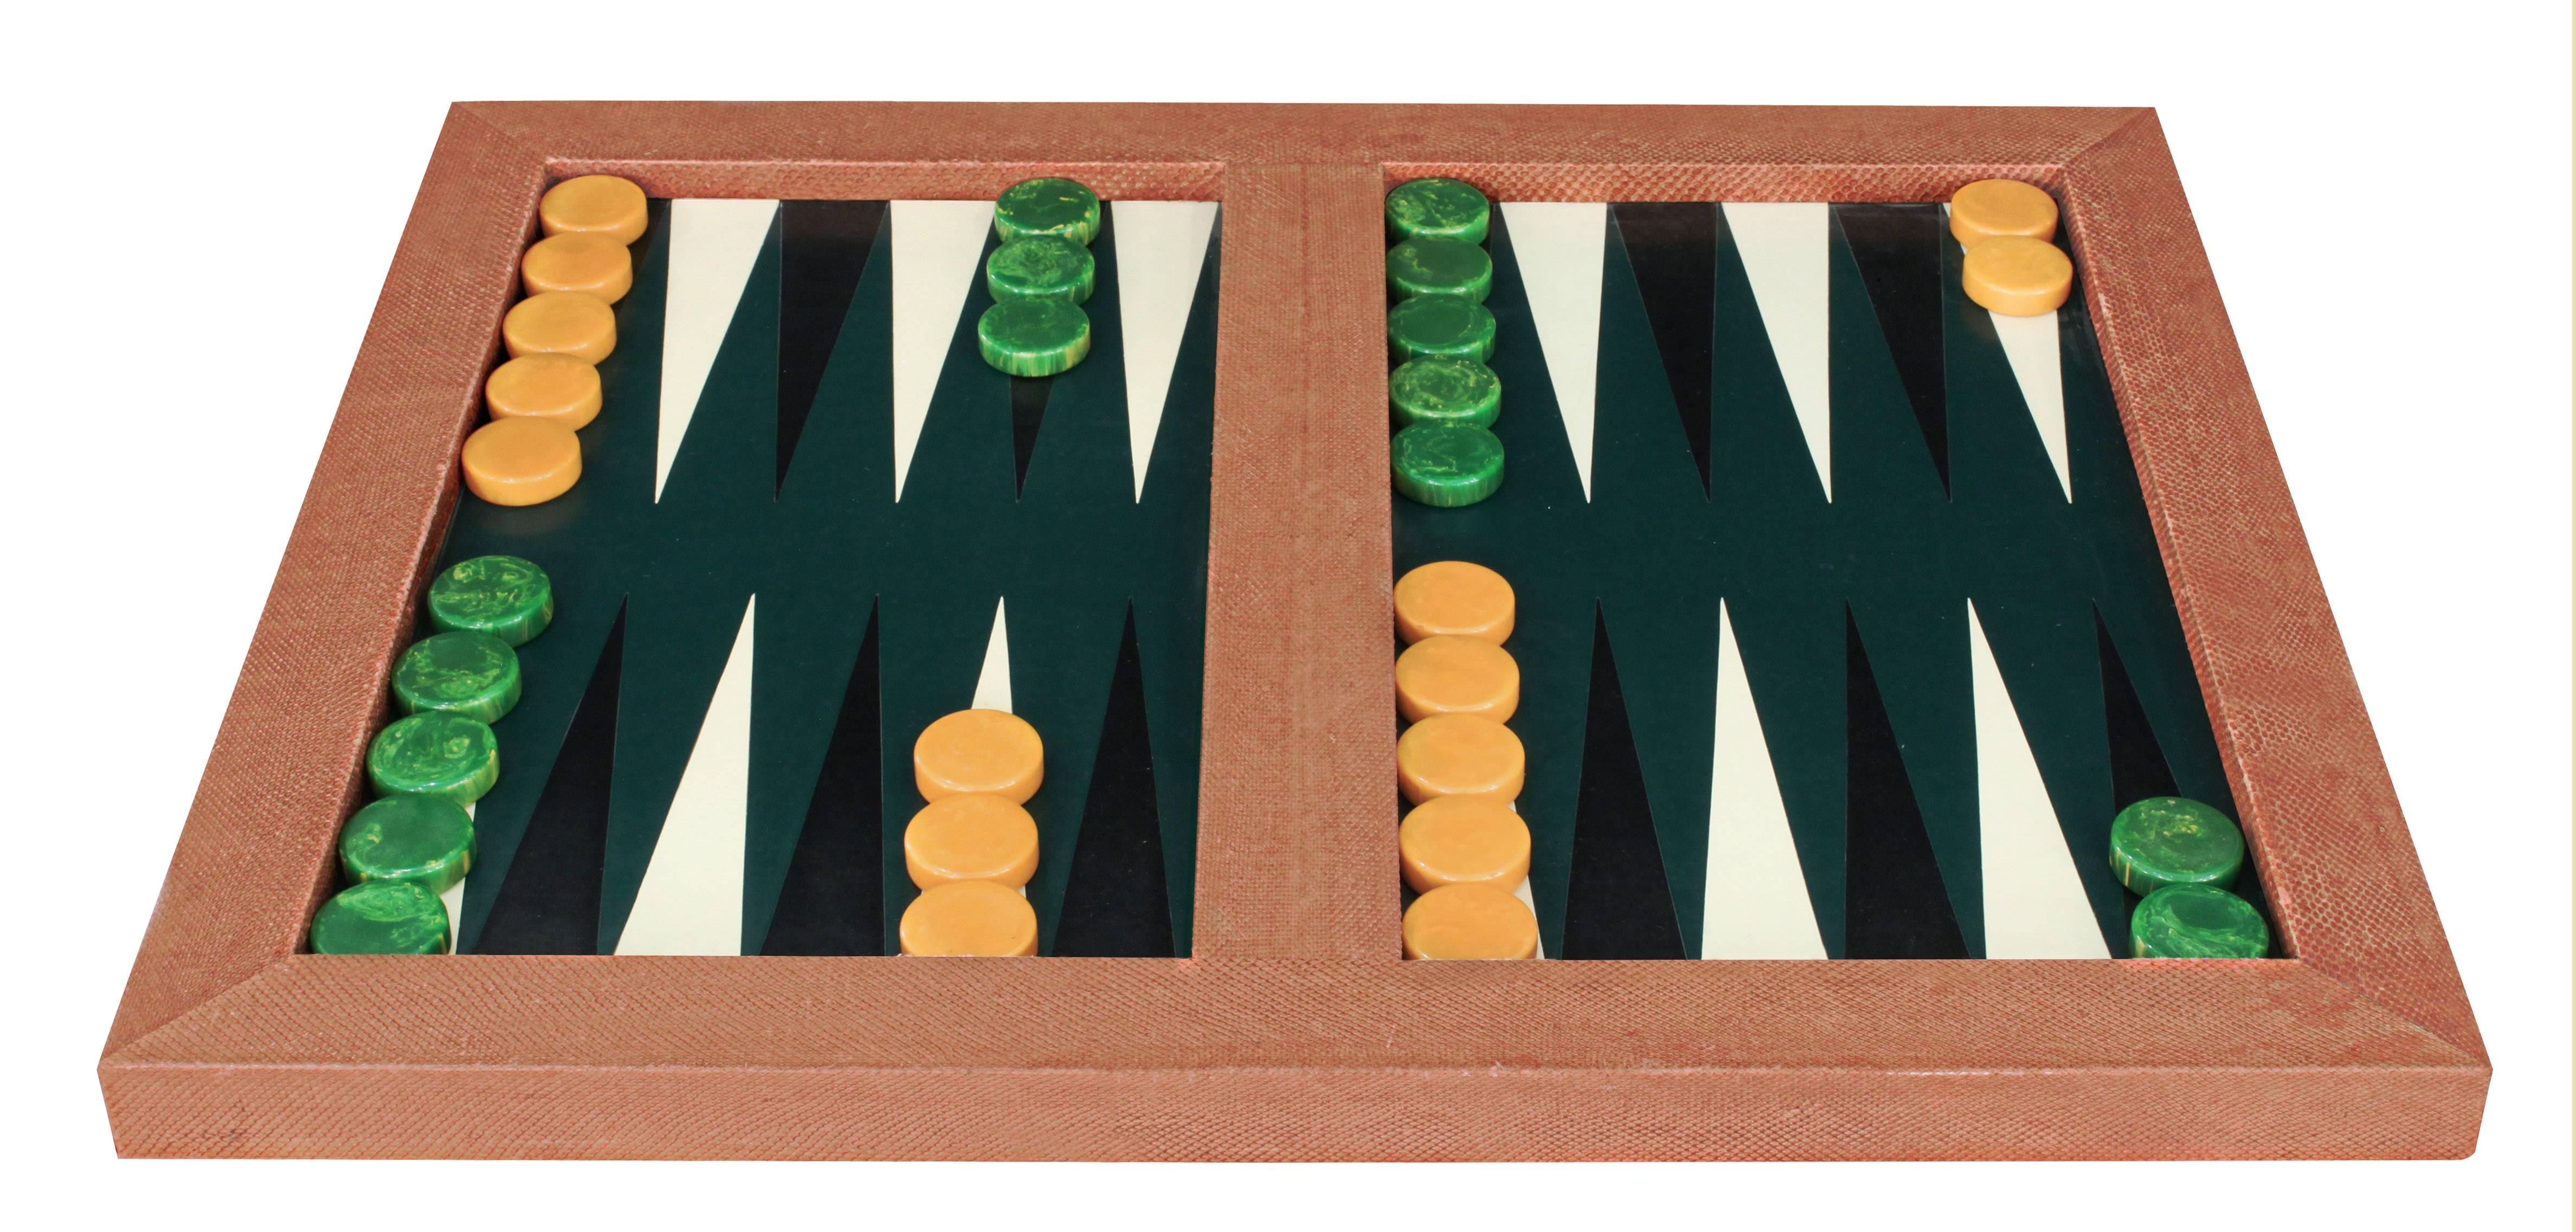 Backgammon game board covered in whip snake with hand-stitched leather board, matching cup and original game pieces by Karl Springer, American 1970s.
 